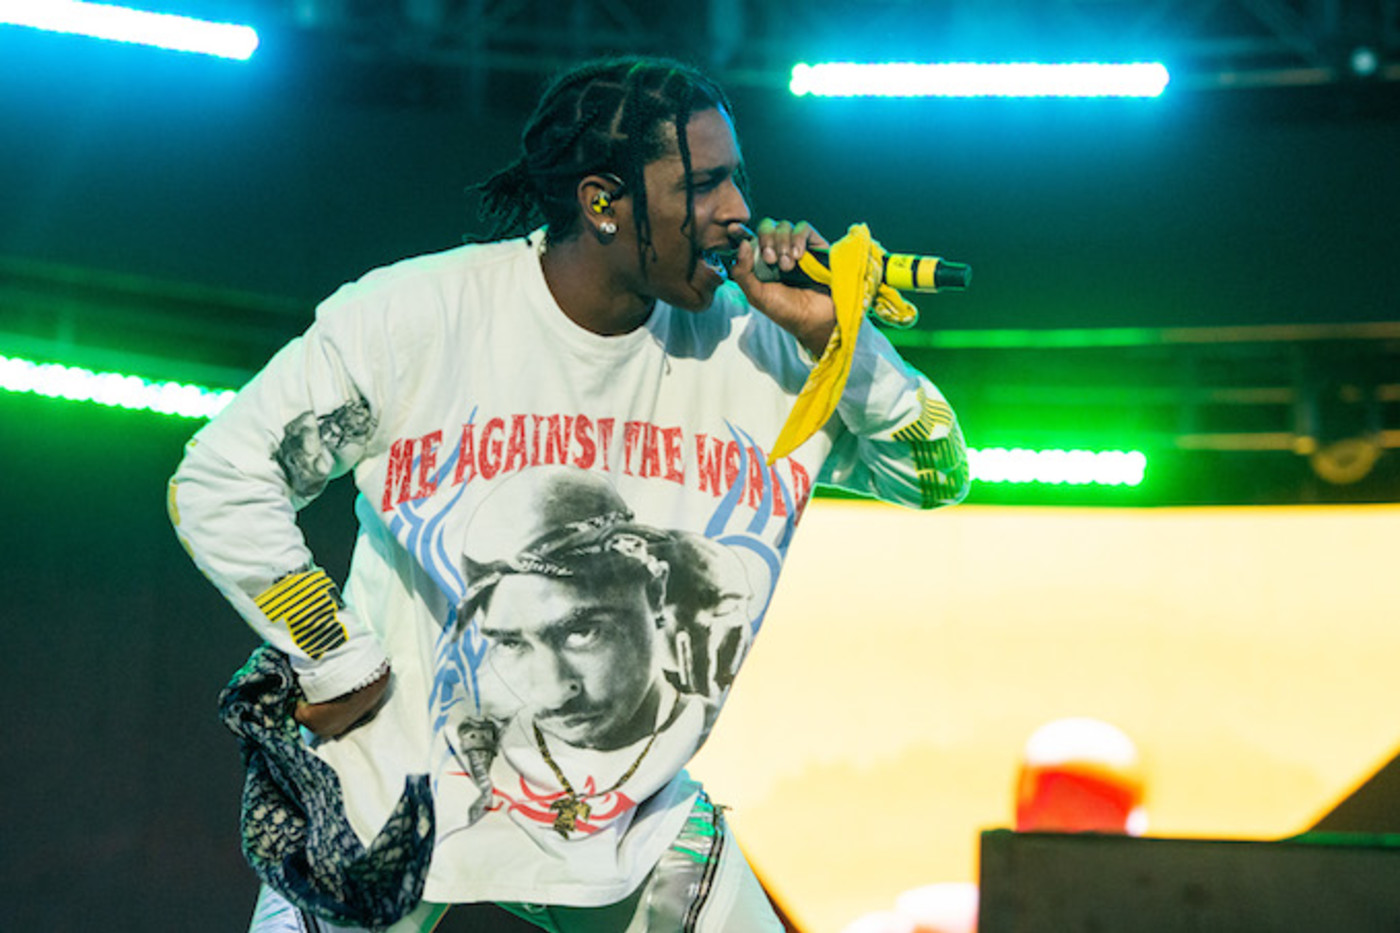 ASAP Rocky Says He’s Down to Do a World Tour With Kid Cudi ‘This Is a